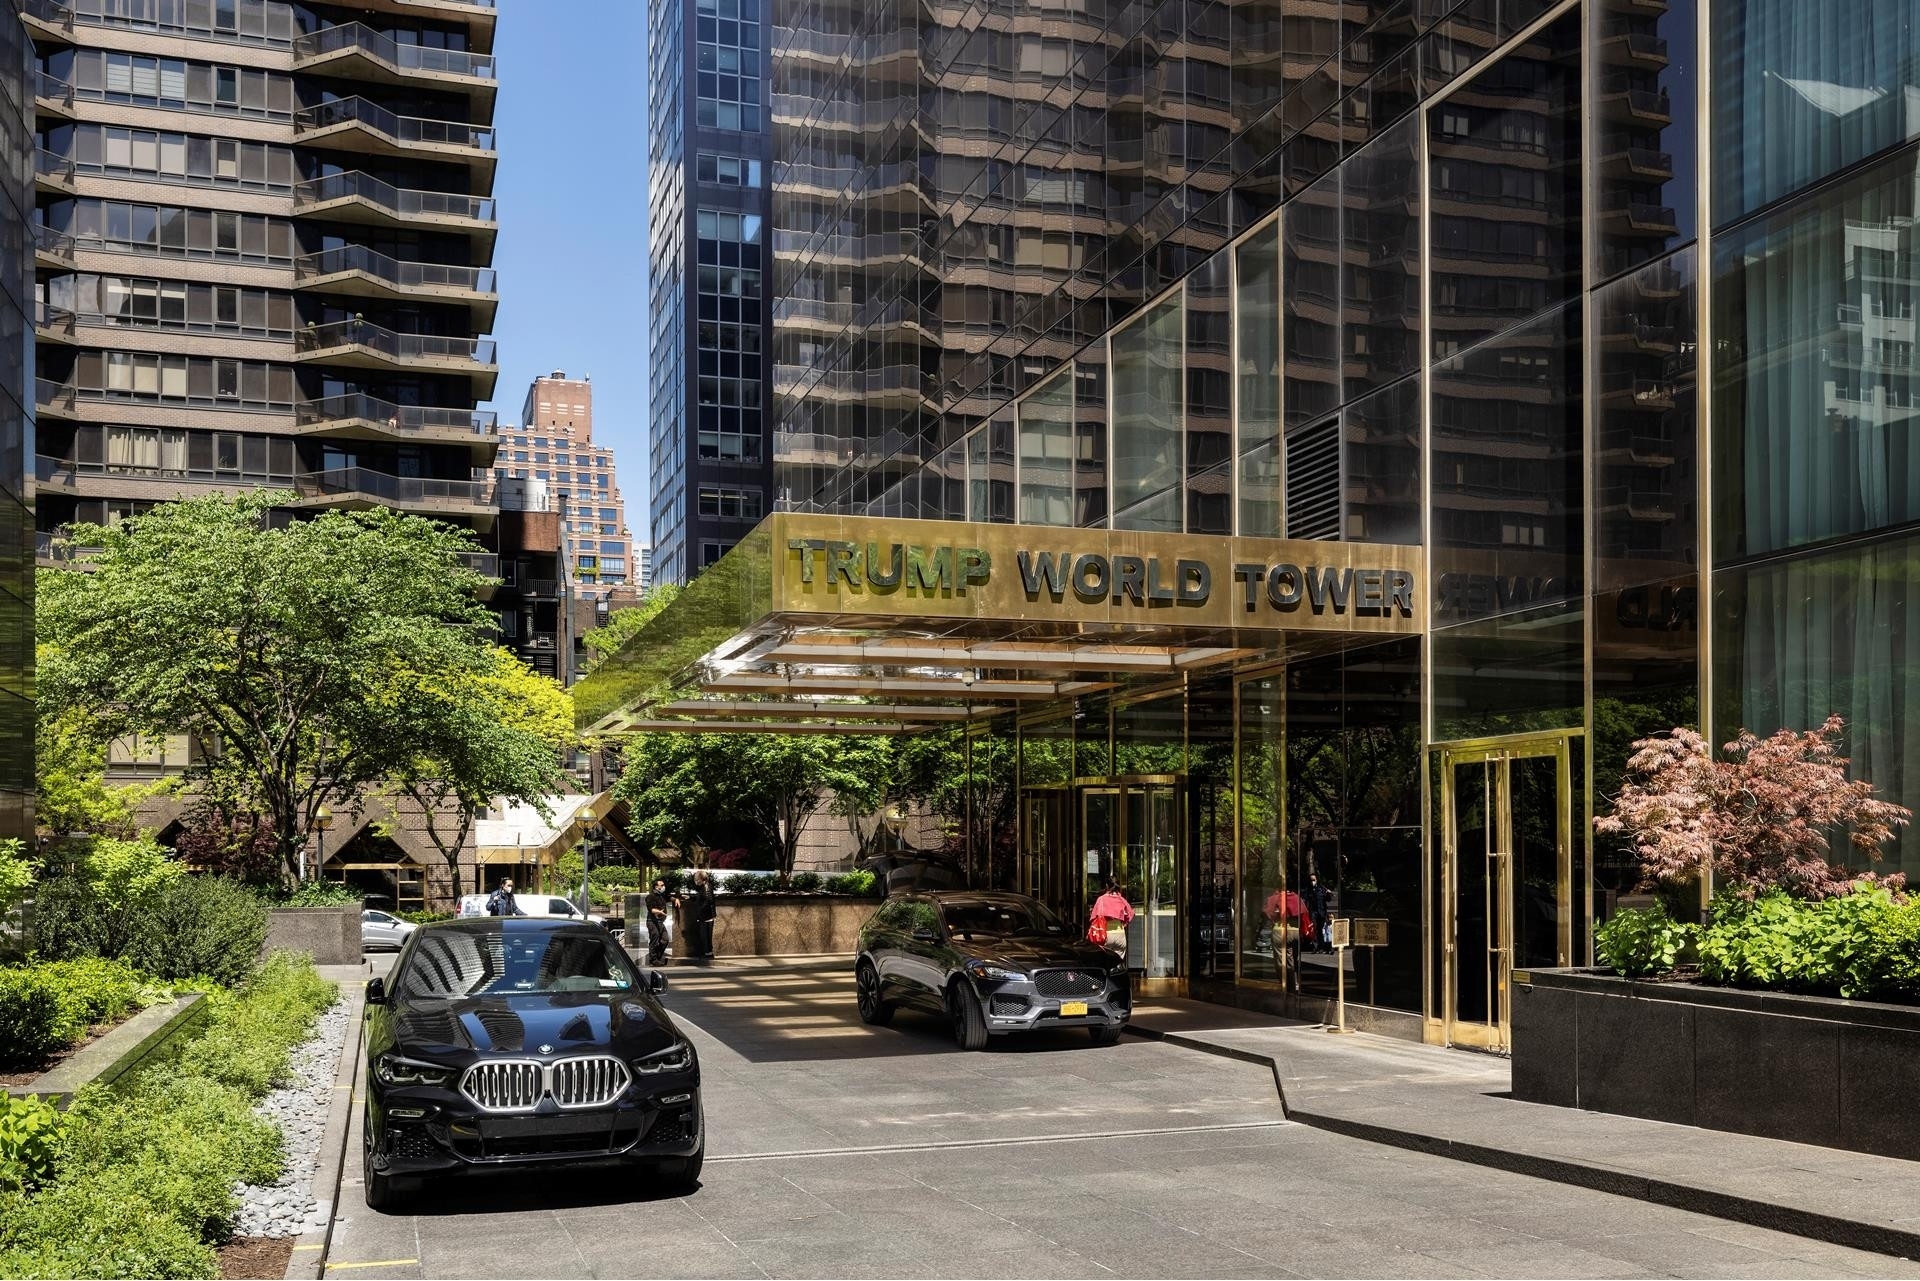 15. Condominiums for Sale at Trump World Tower, 845 UNITED NATIONS PLZ, 82A Turtle Bay, New York, NY 10017